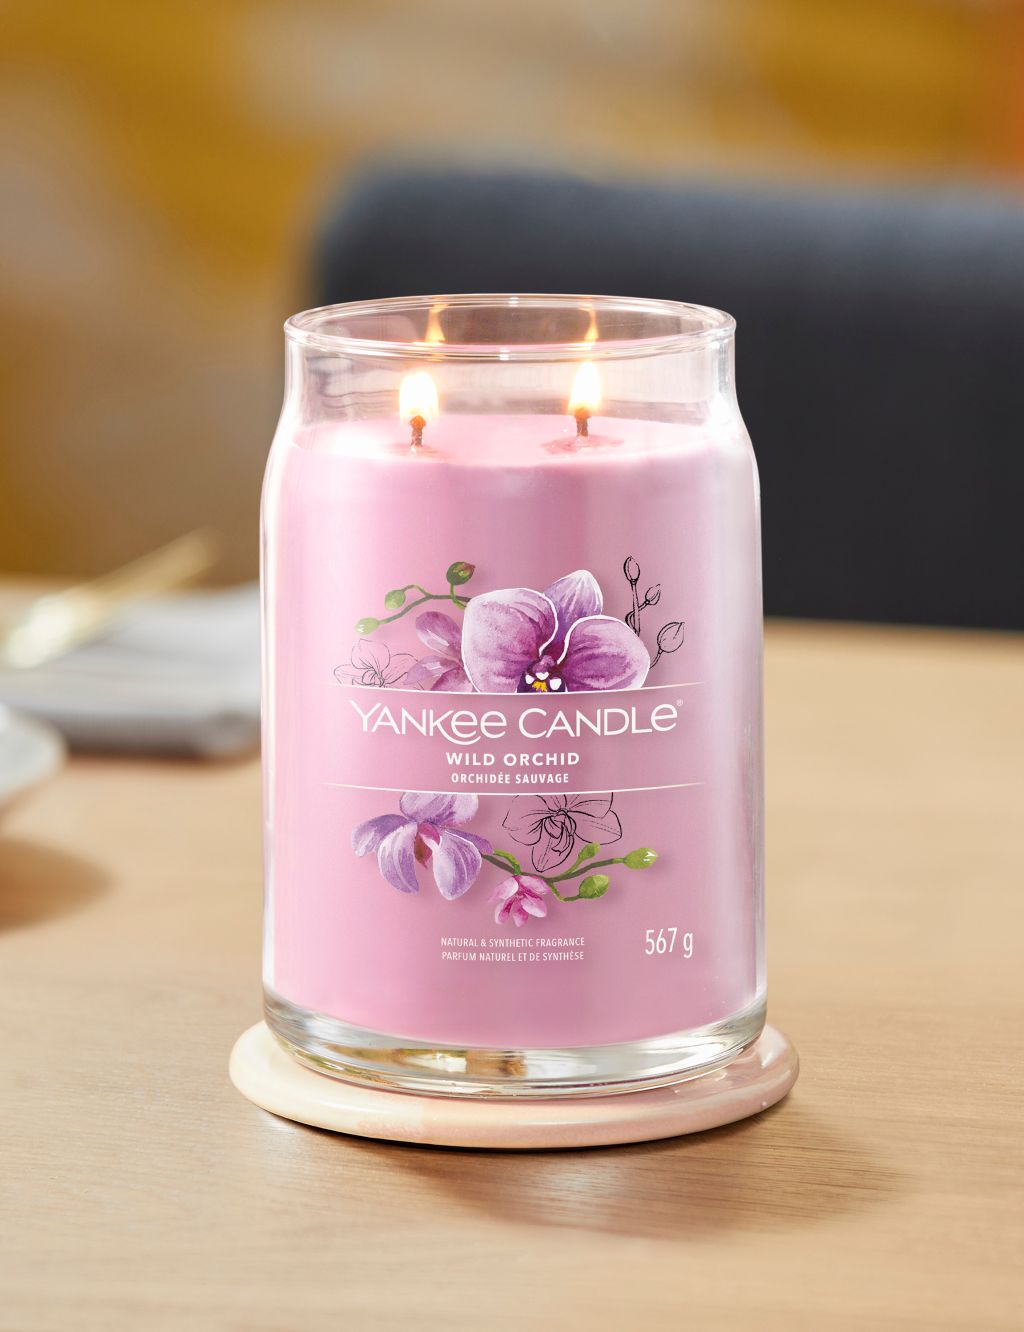 Wild Orchid Signature Large Jar Scented Candle image 2